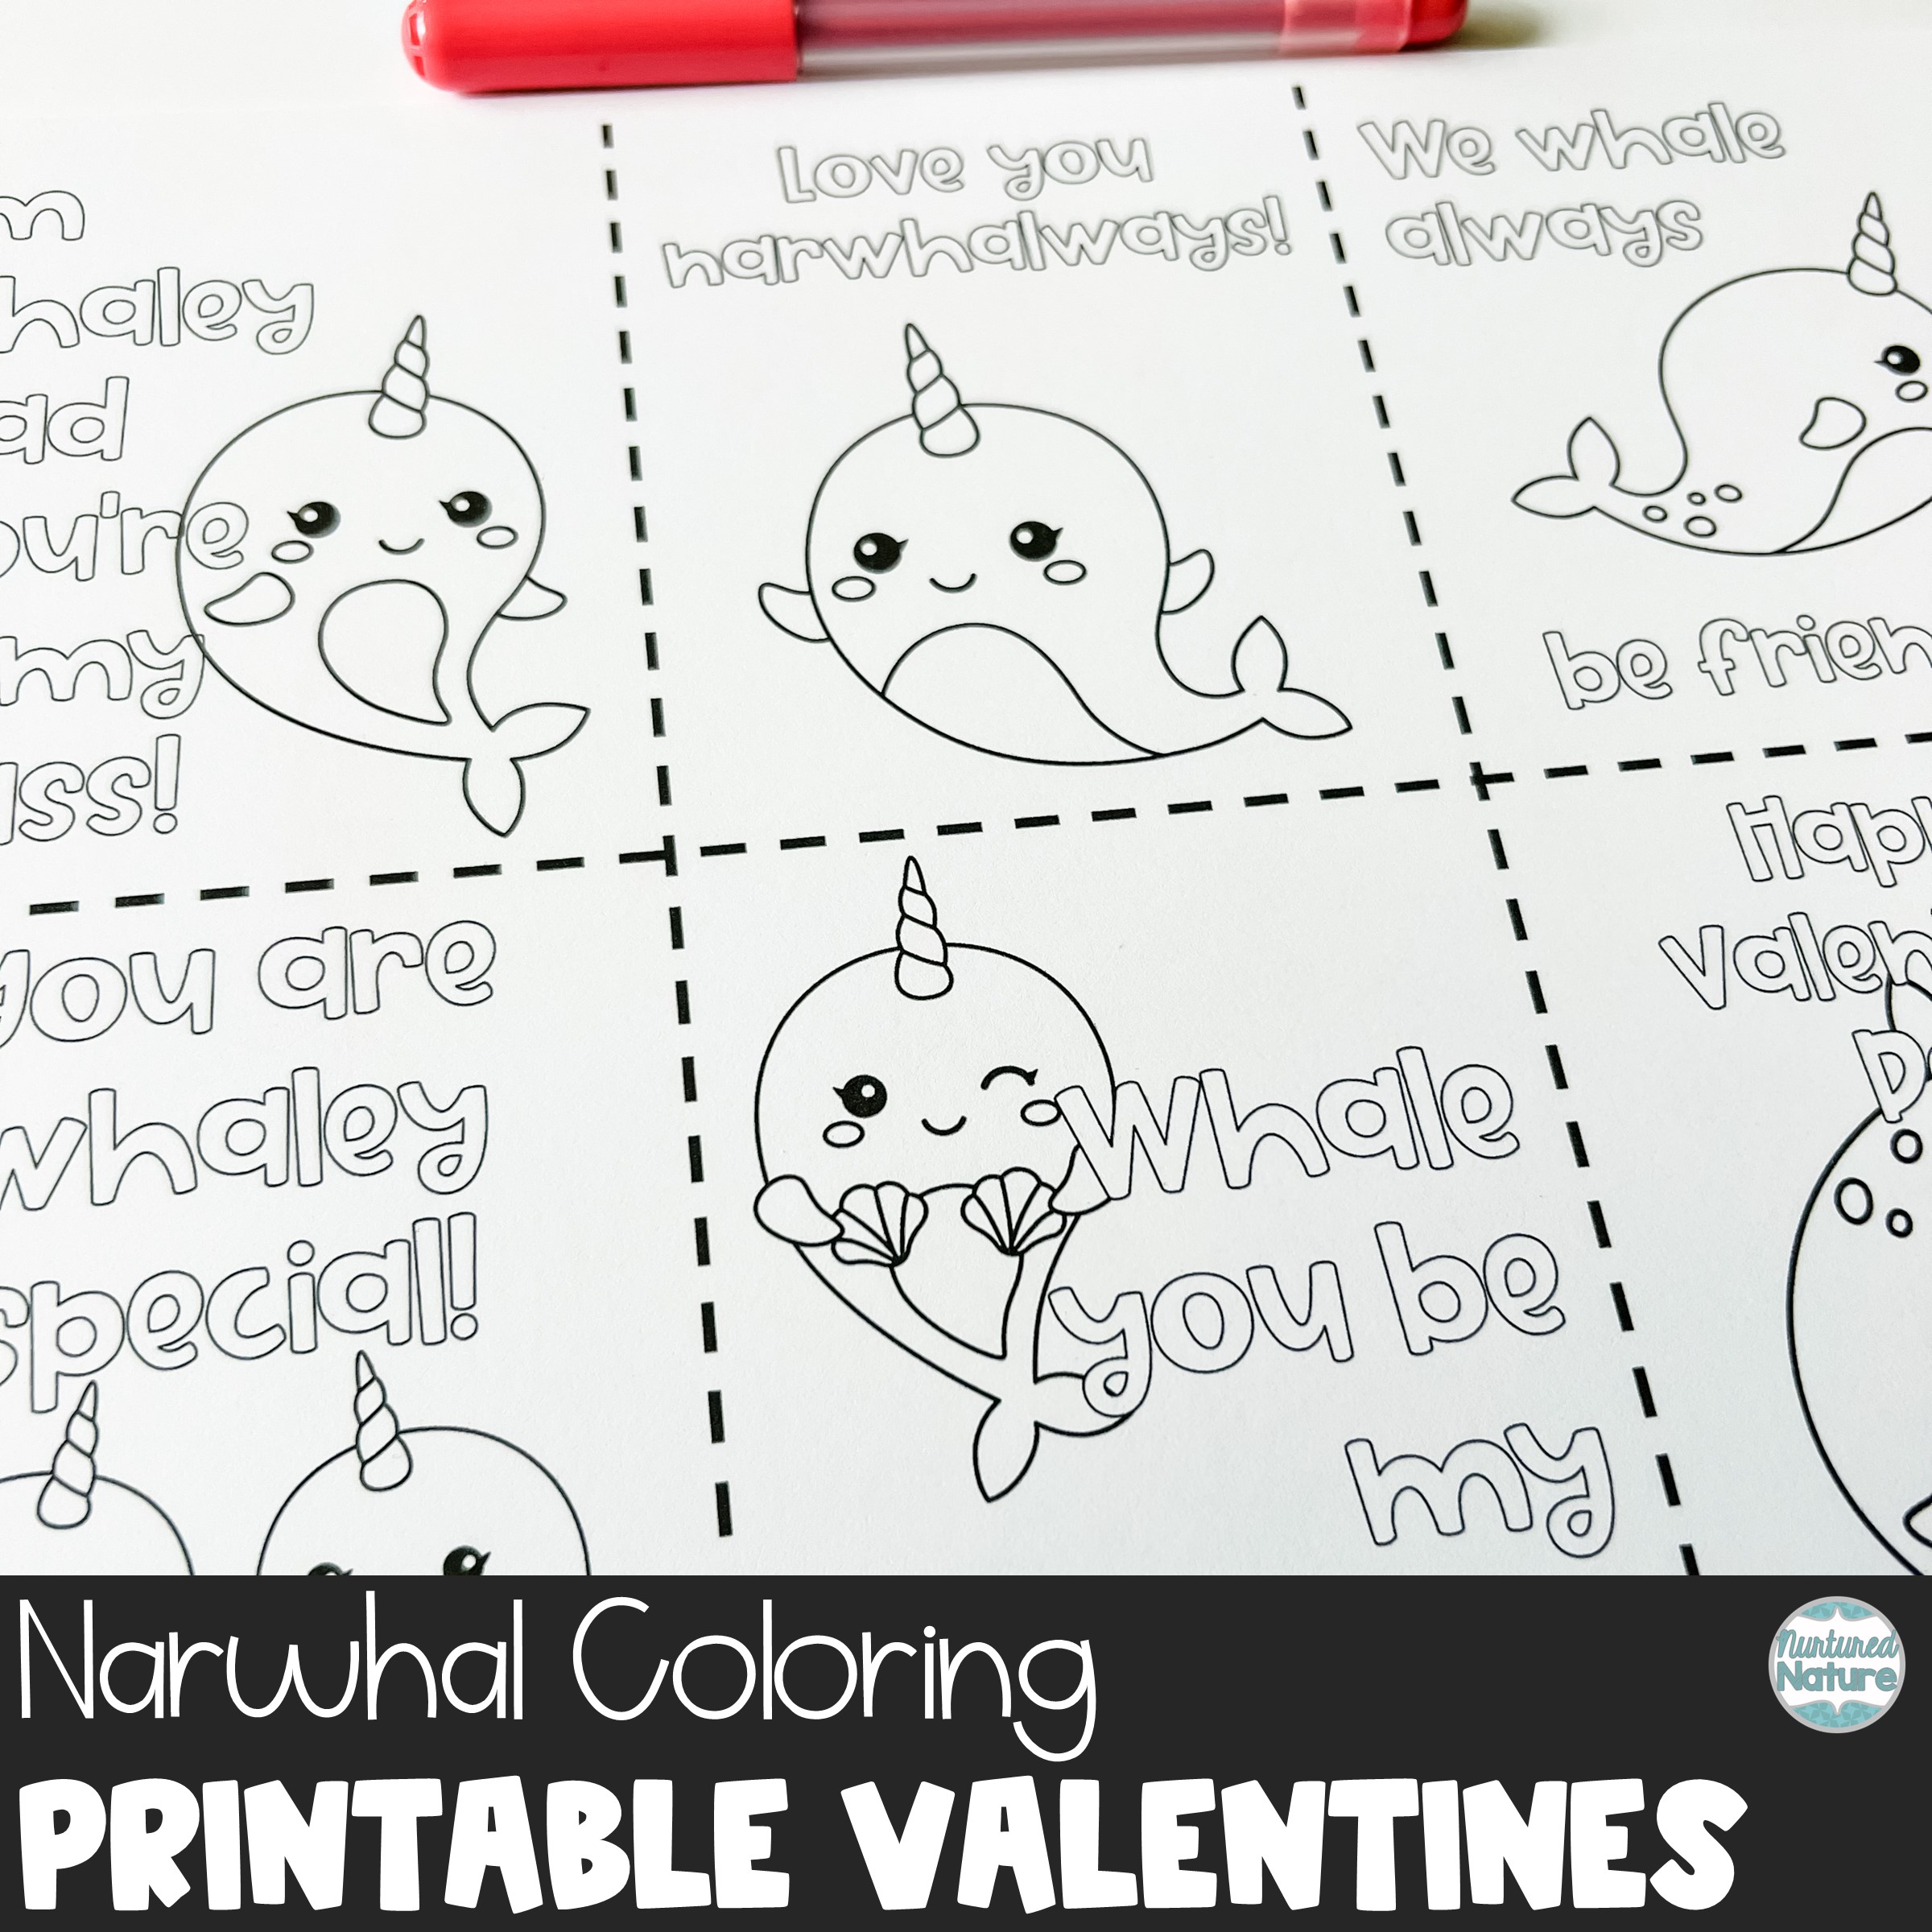 Narwhal coloring valentines day cards for students made by teachers